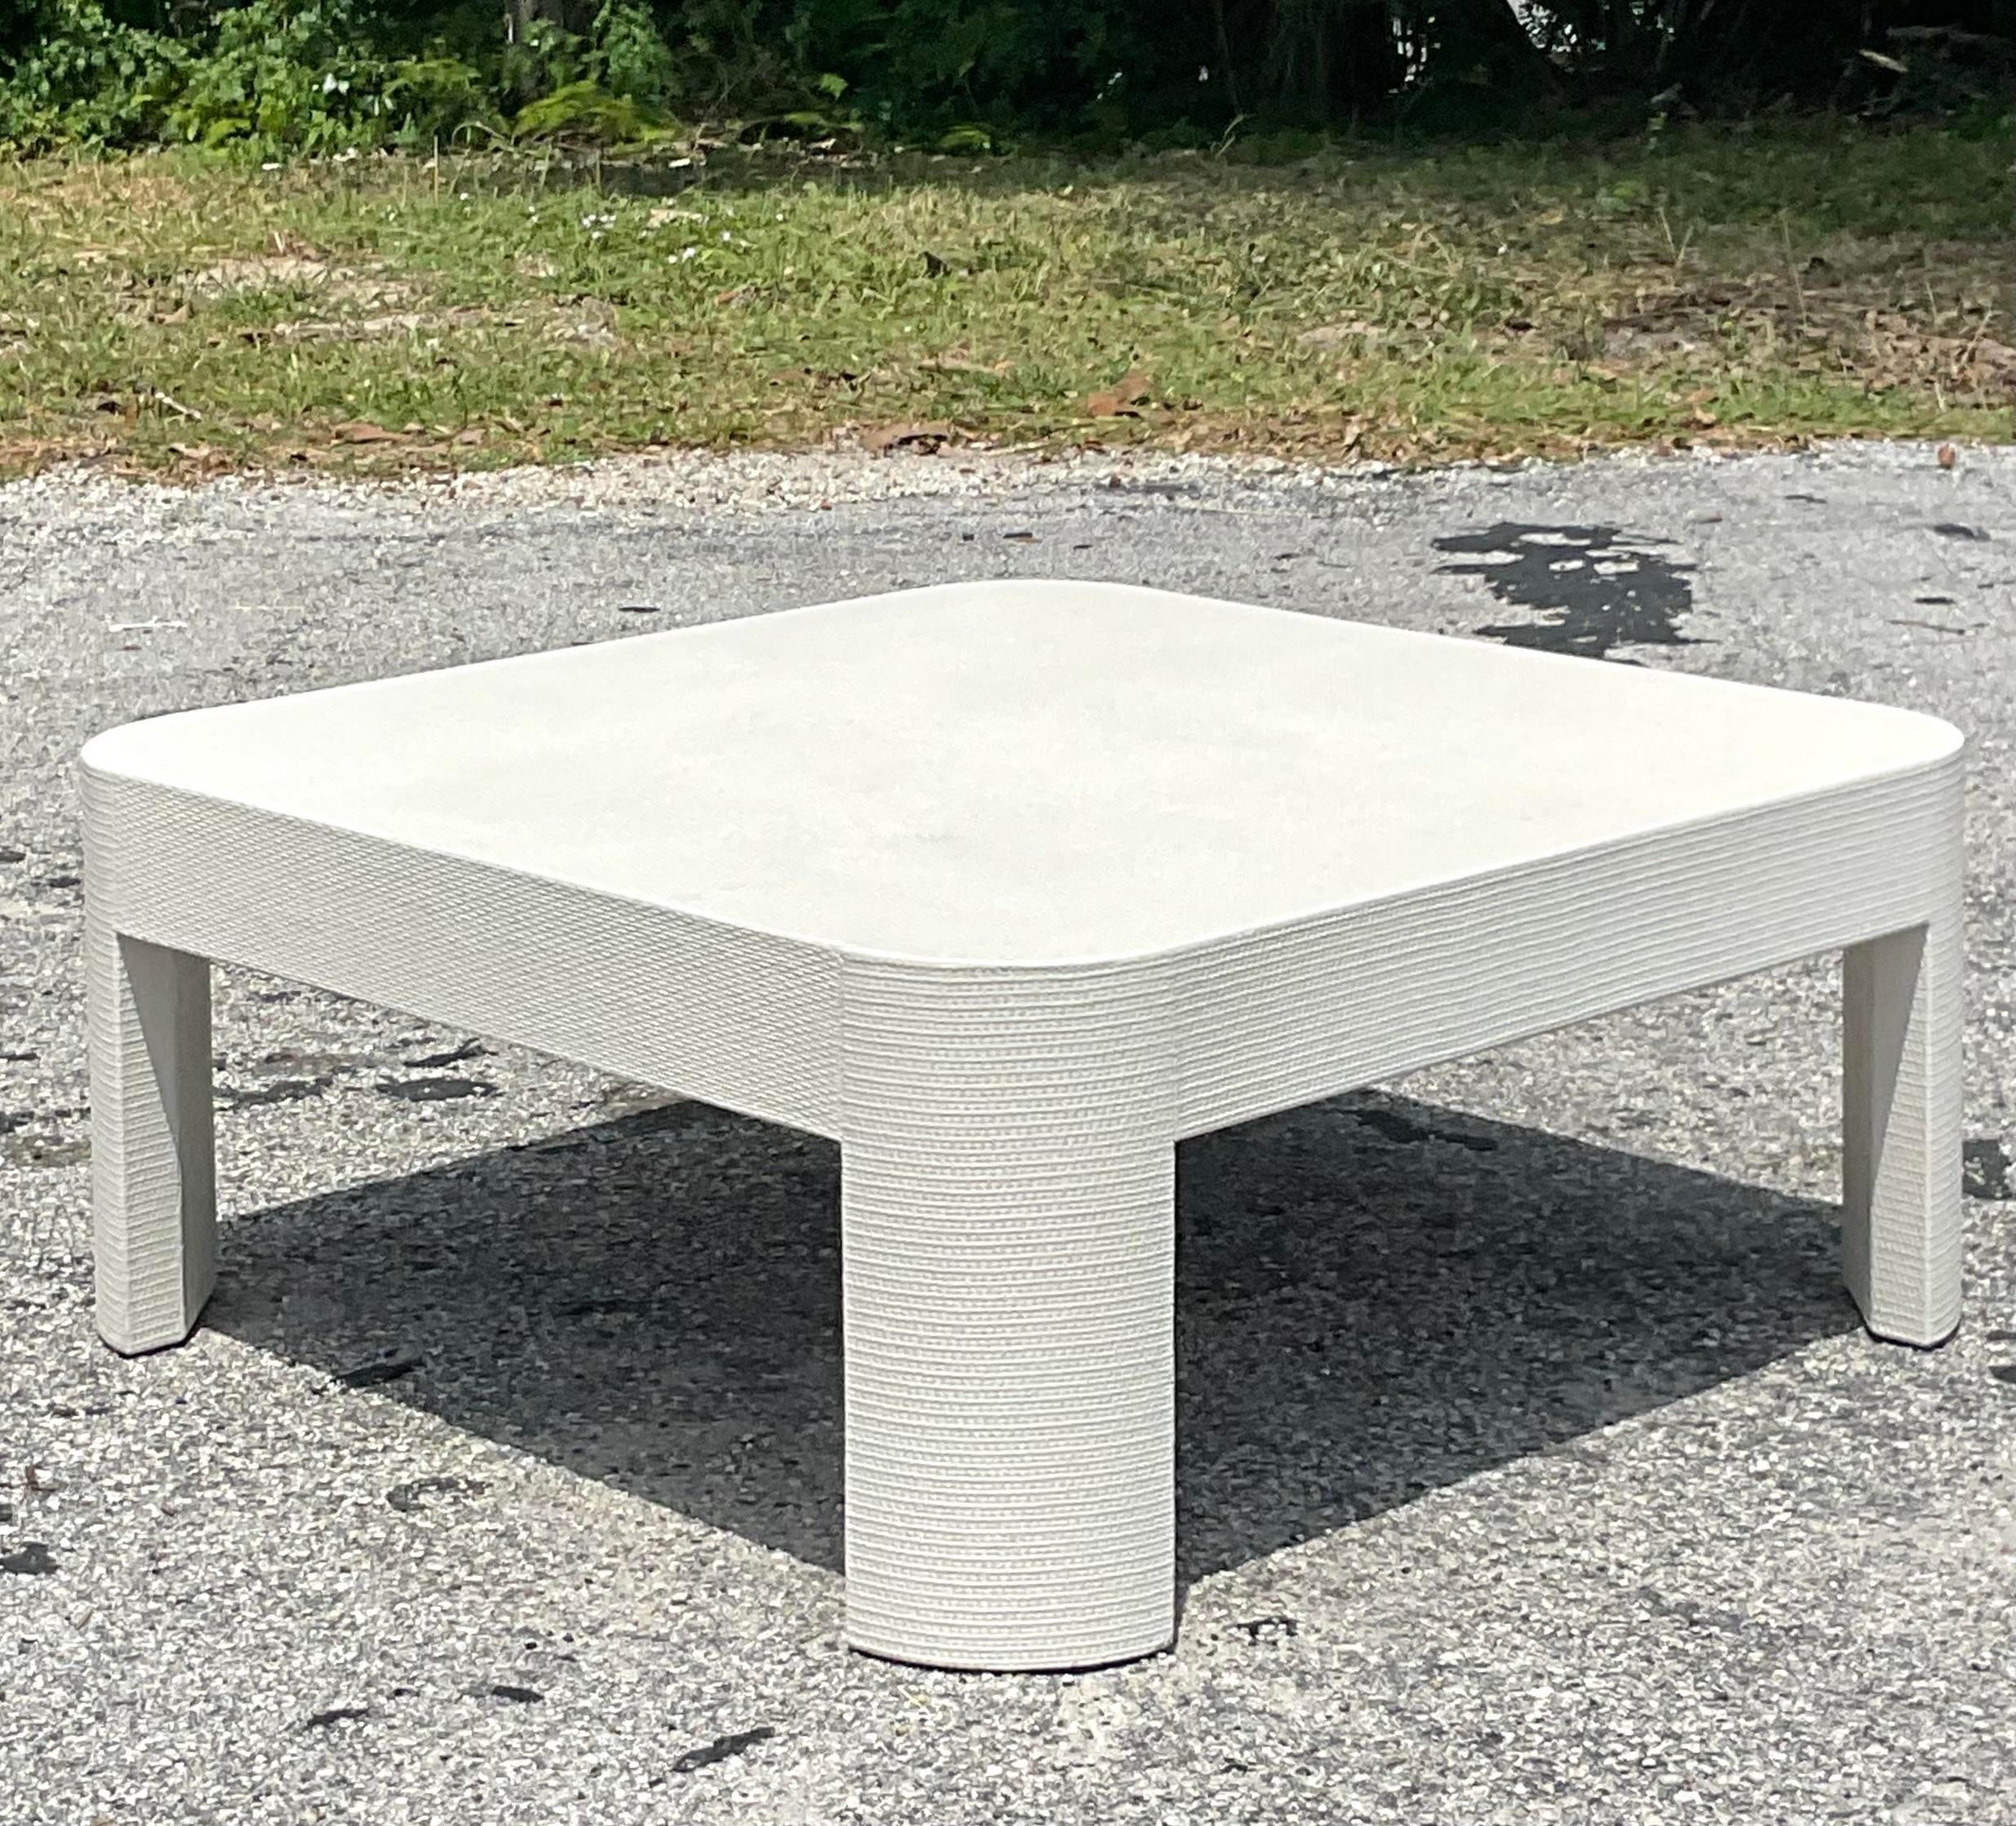 A fabulous vintage Coastal coffee table. A chided wrapped Grasscloth design in a clean modern shape. Acquired from a Palm Beach estate.